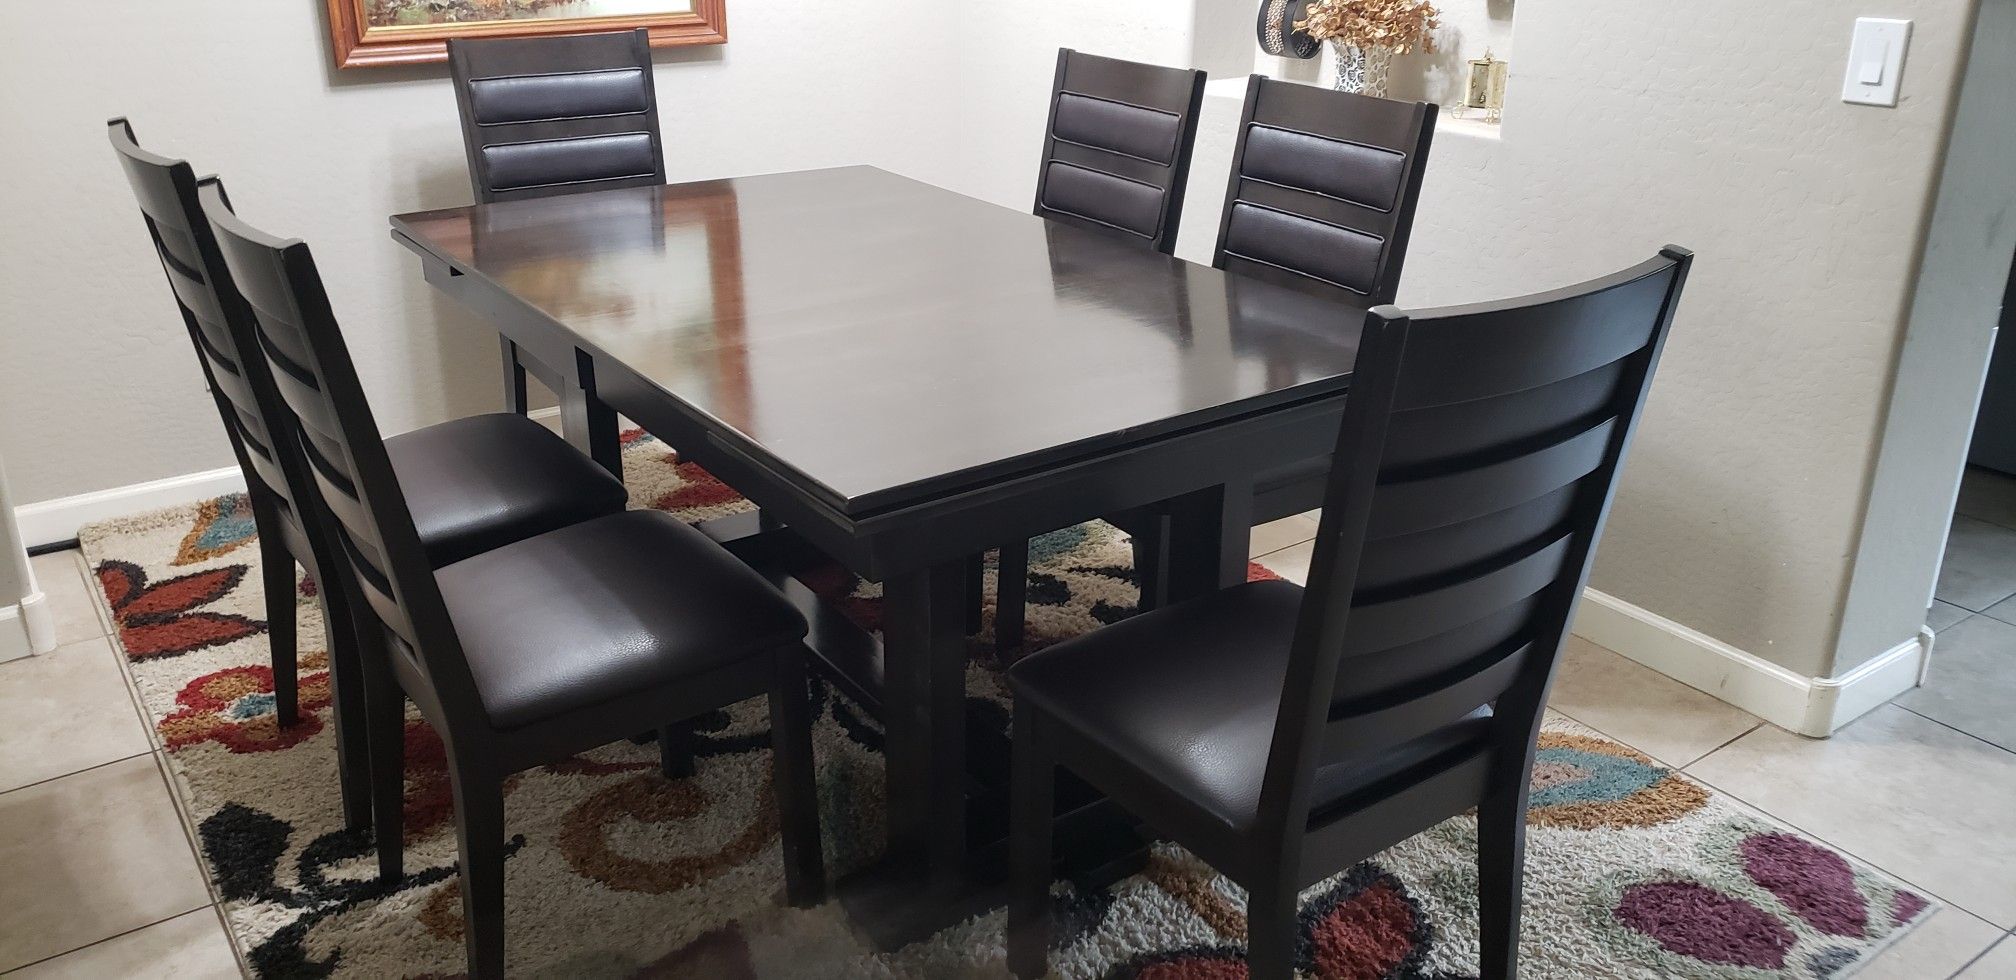 Dining Table with 6 chairs.